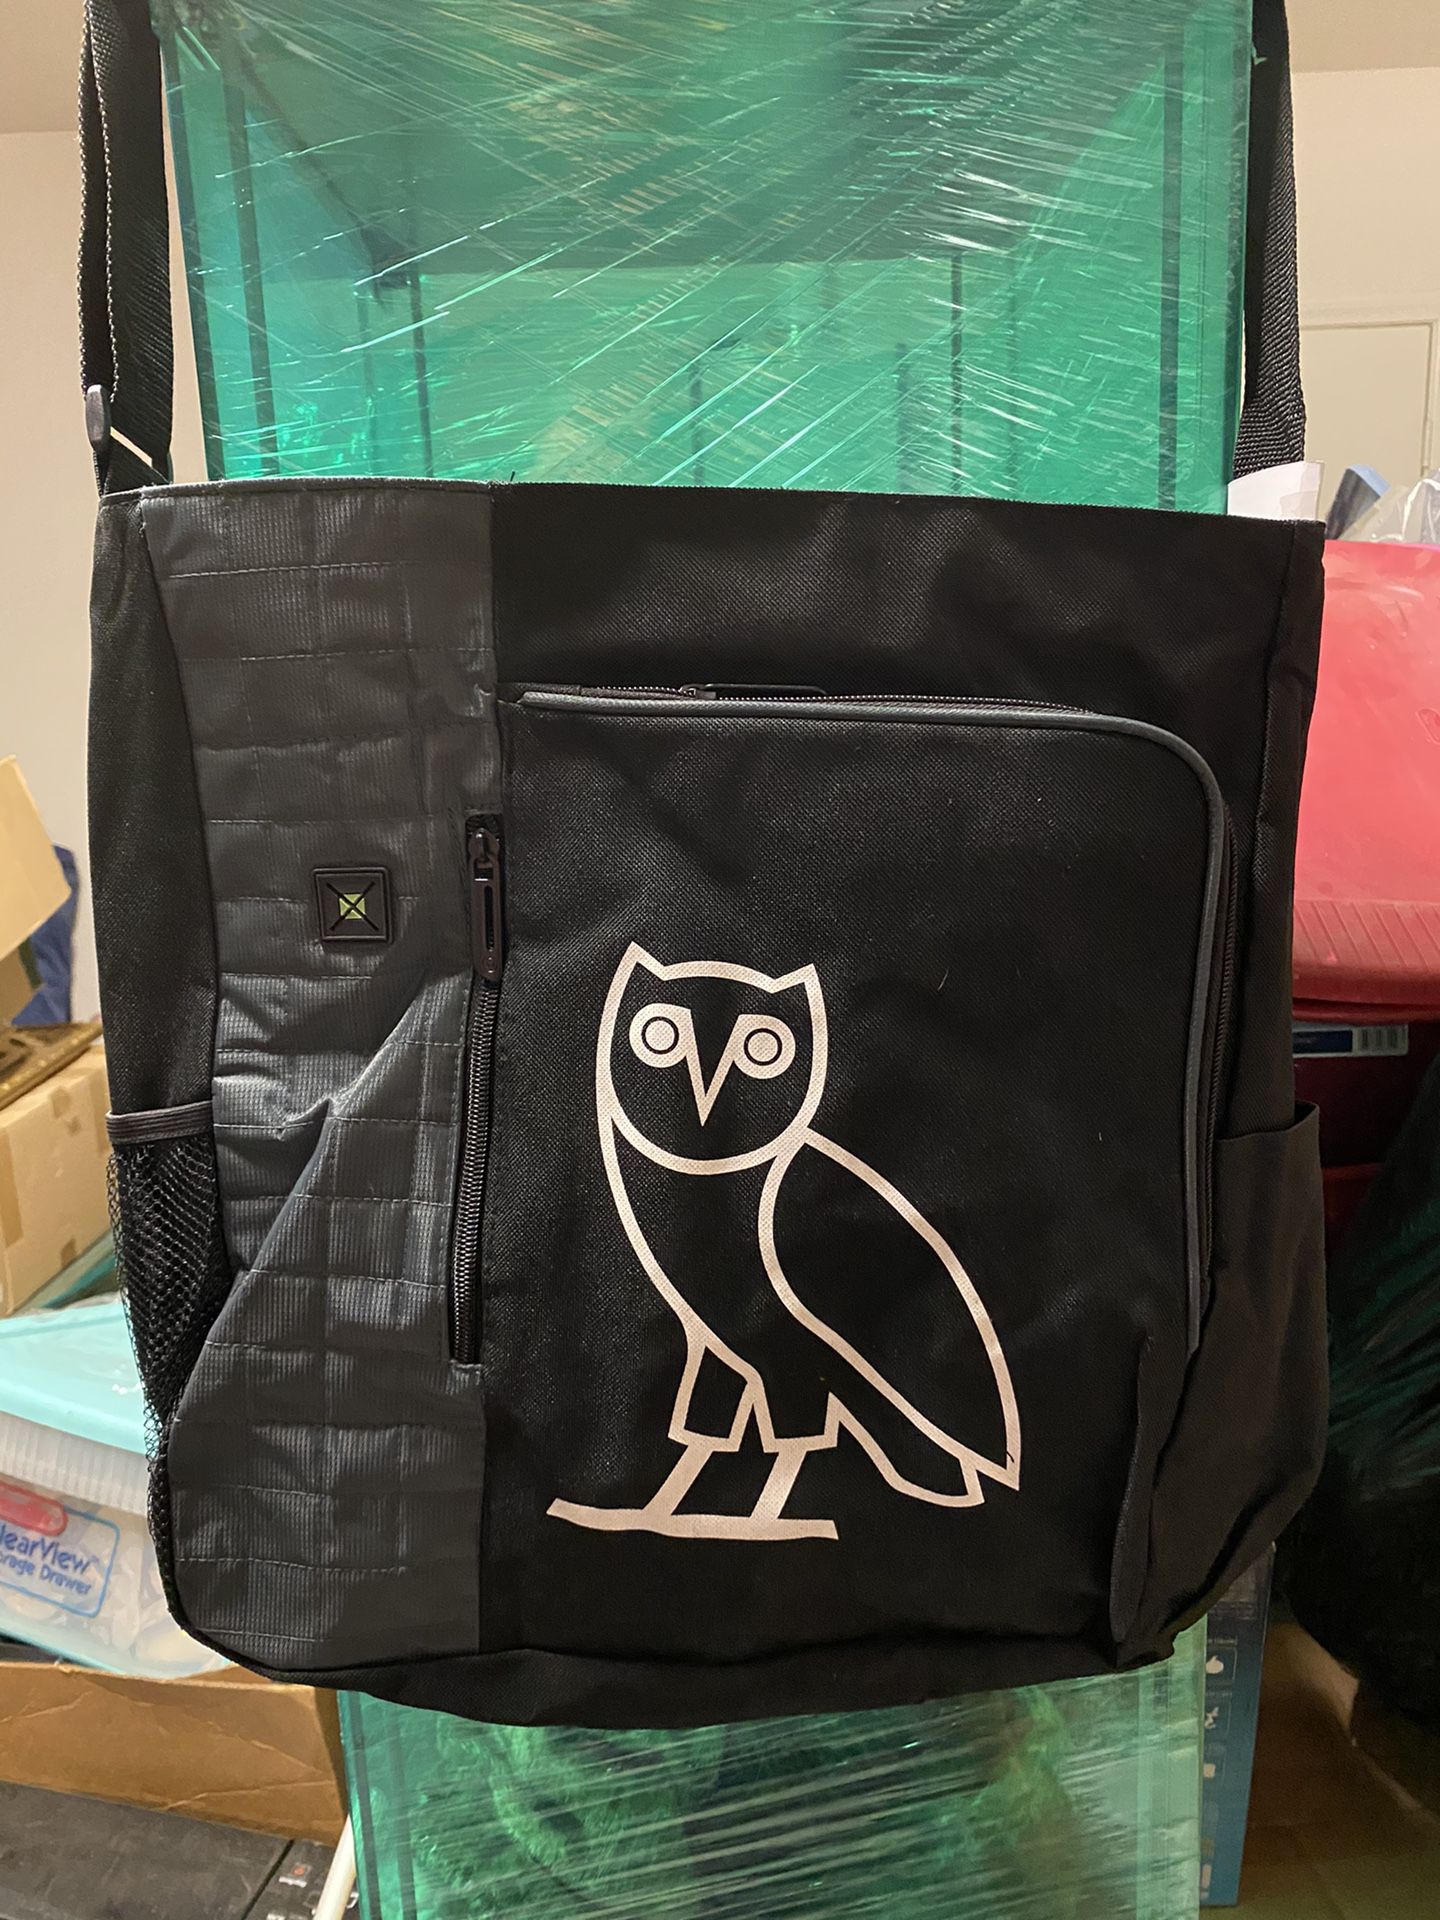 October’s Very Own OVO Authentic messenger bag